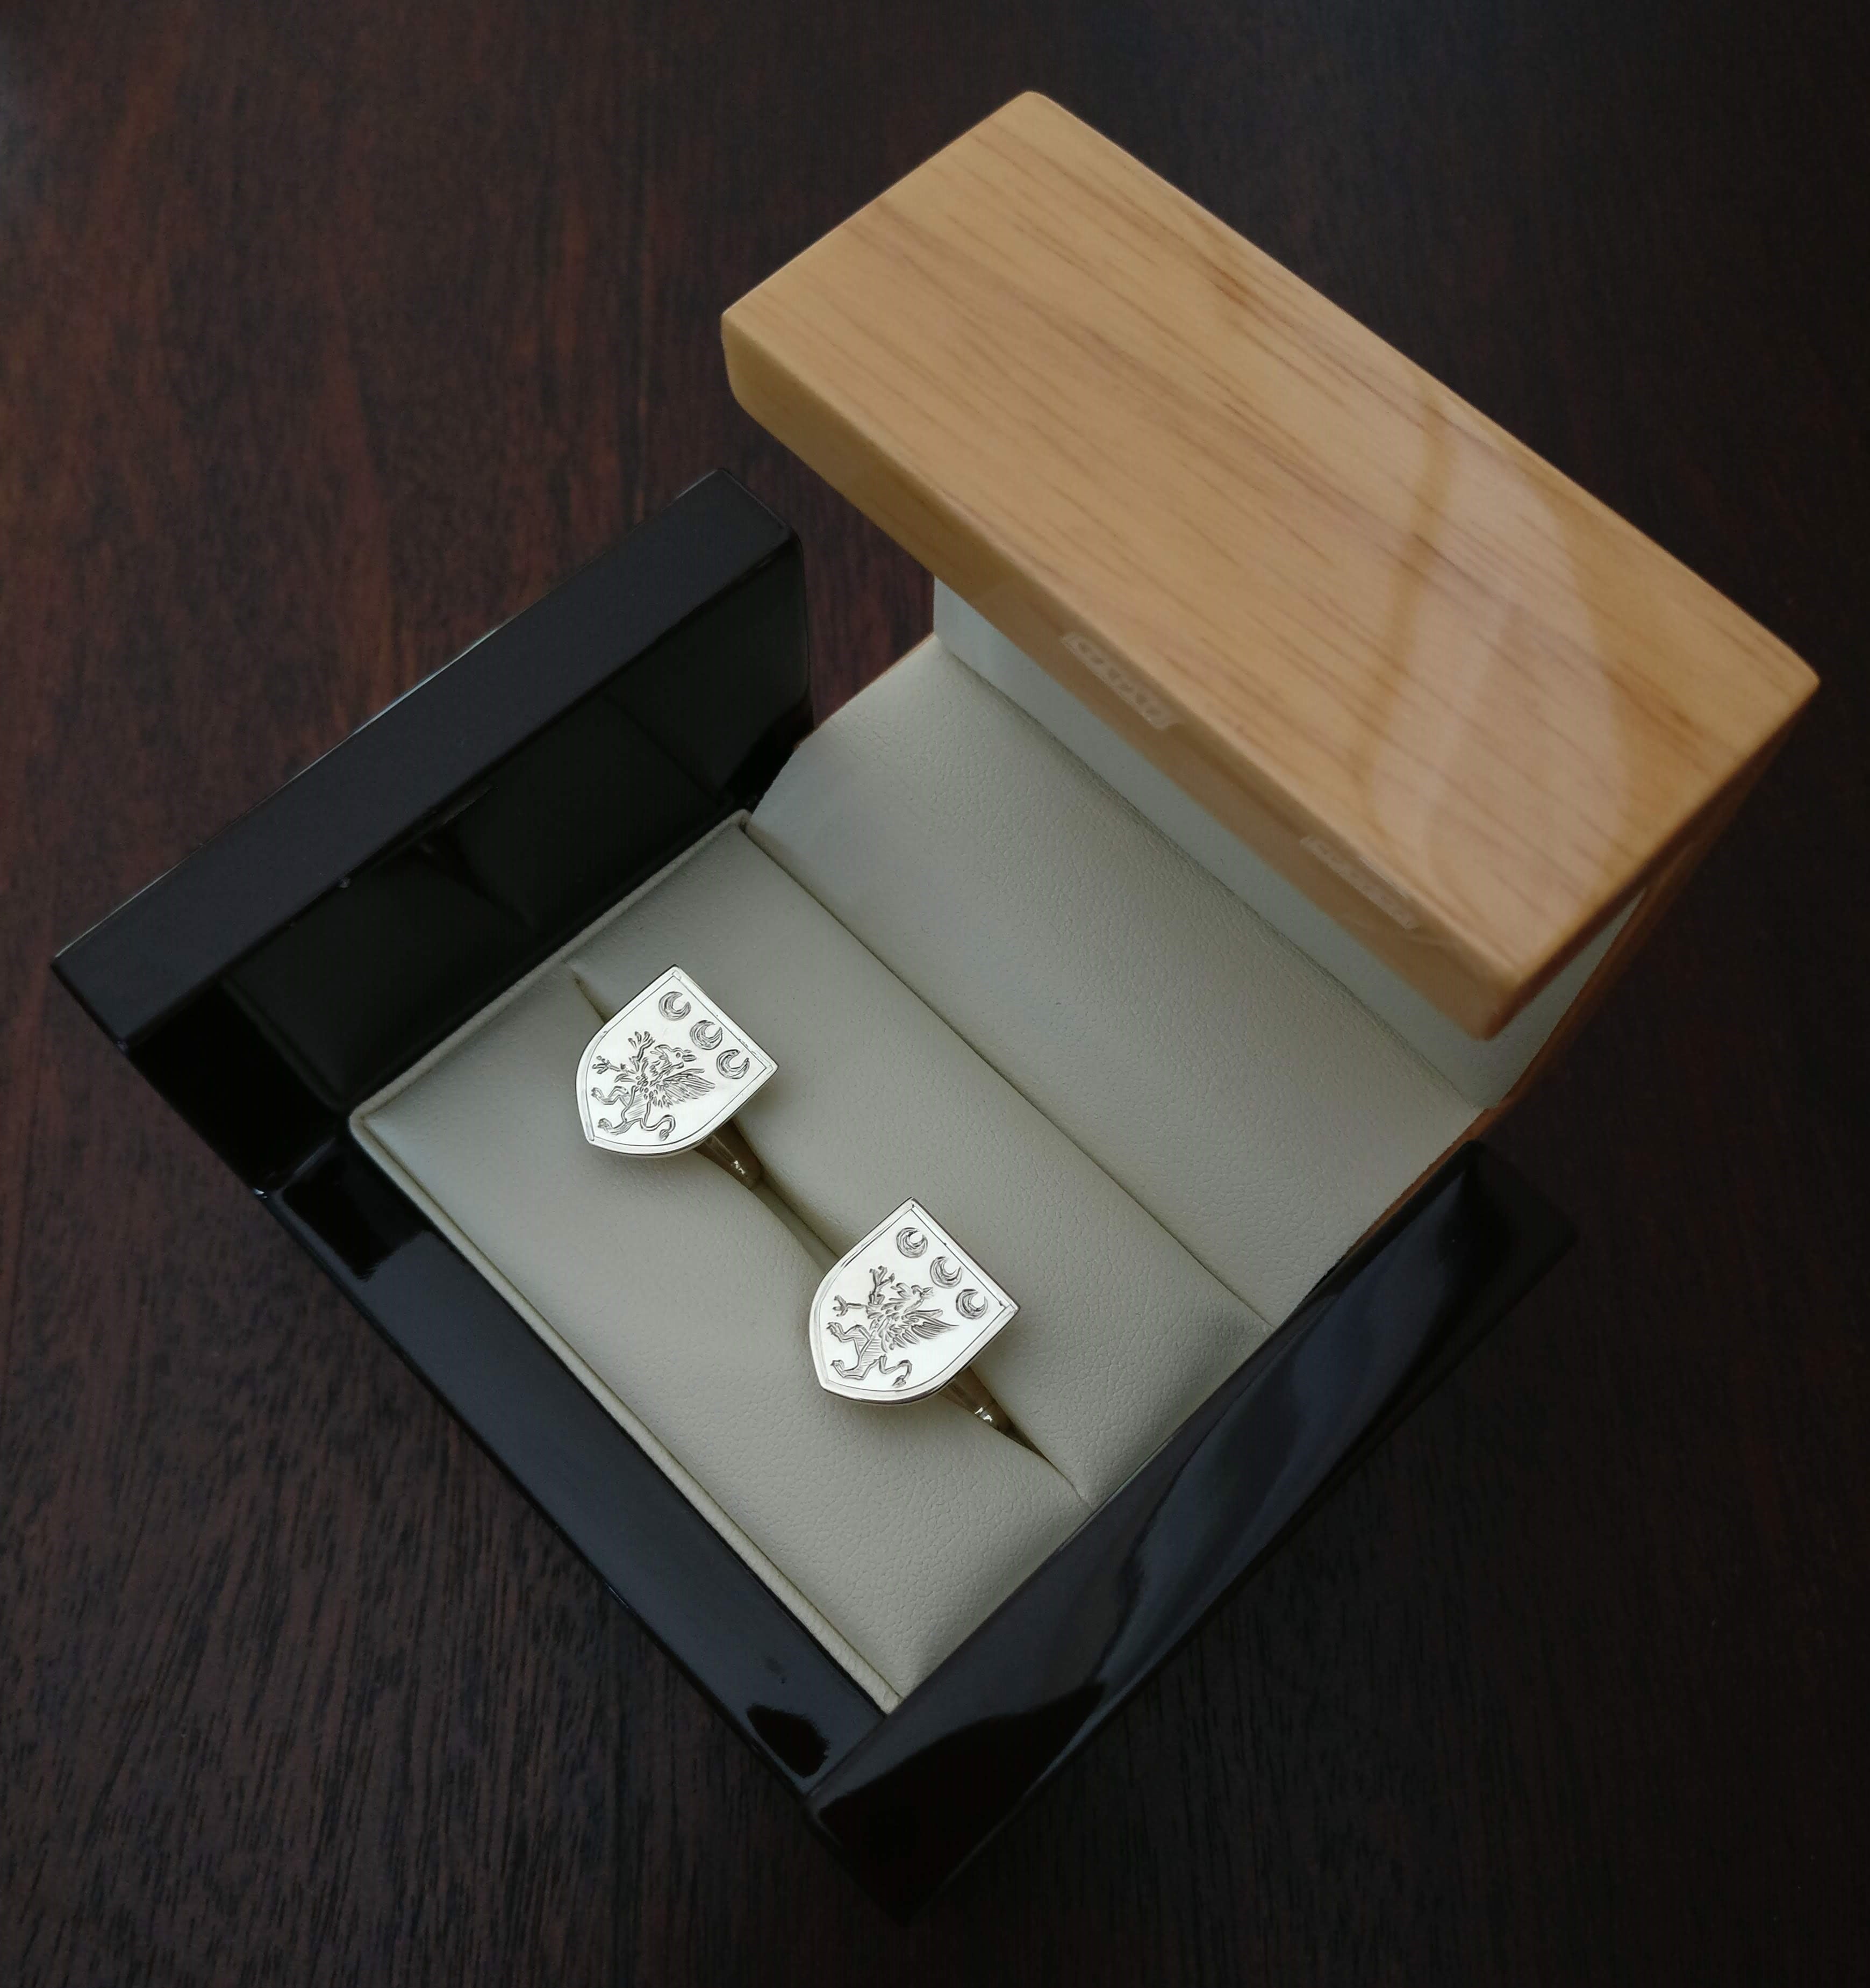 Select Gifts Hetherington England Family Crest Coat Of Arms Gold Cufflinks Engraved Box